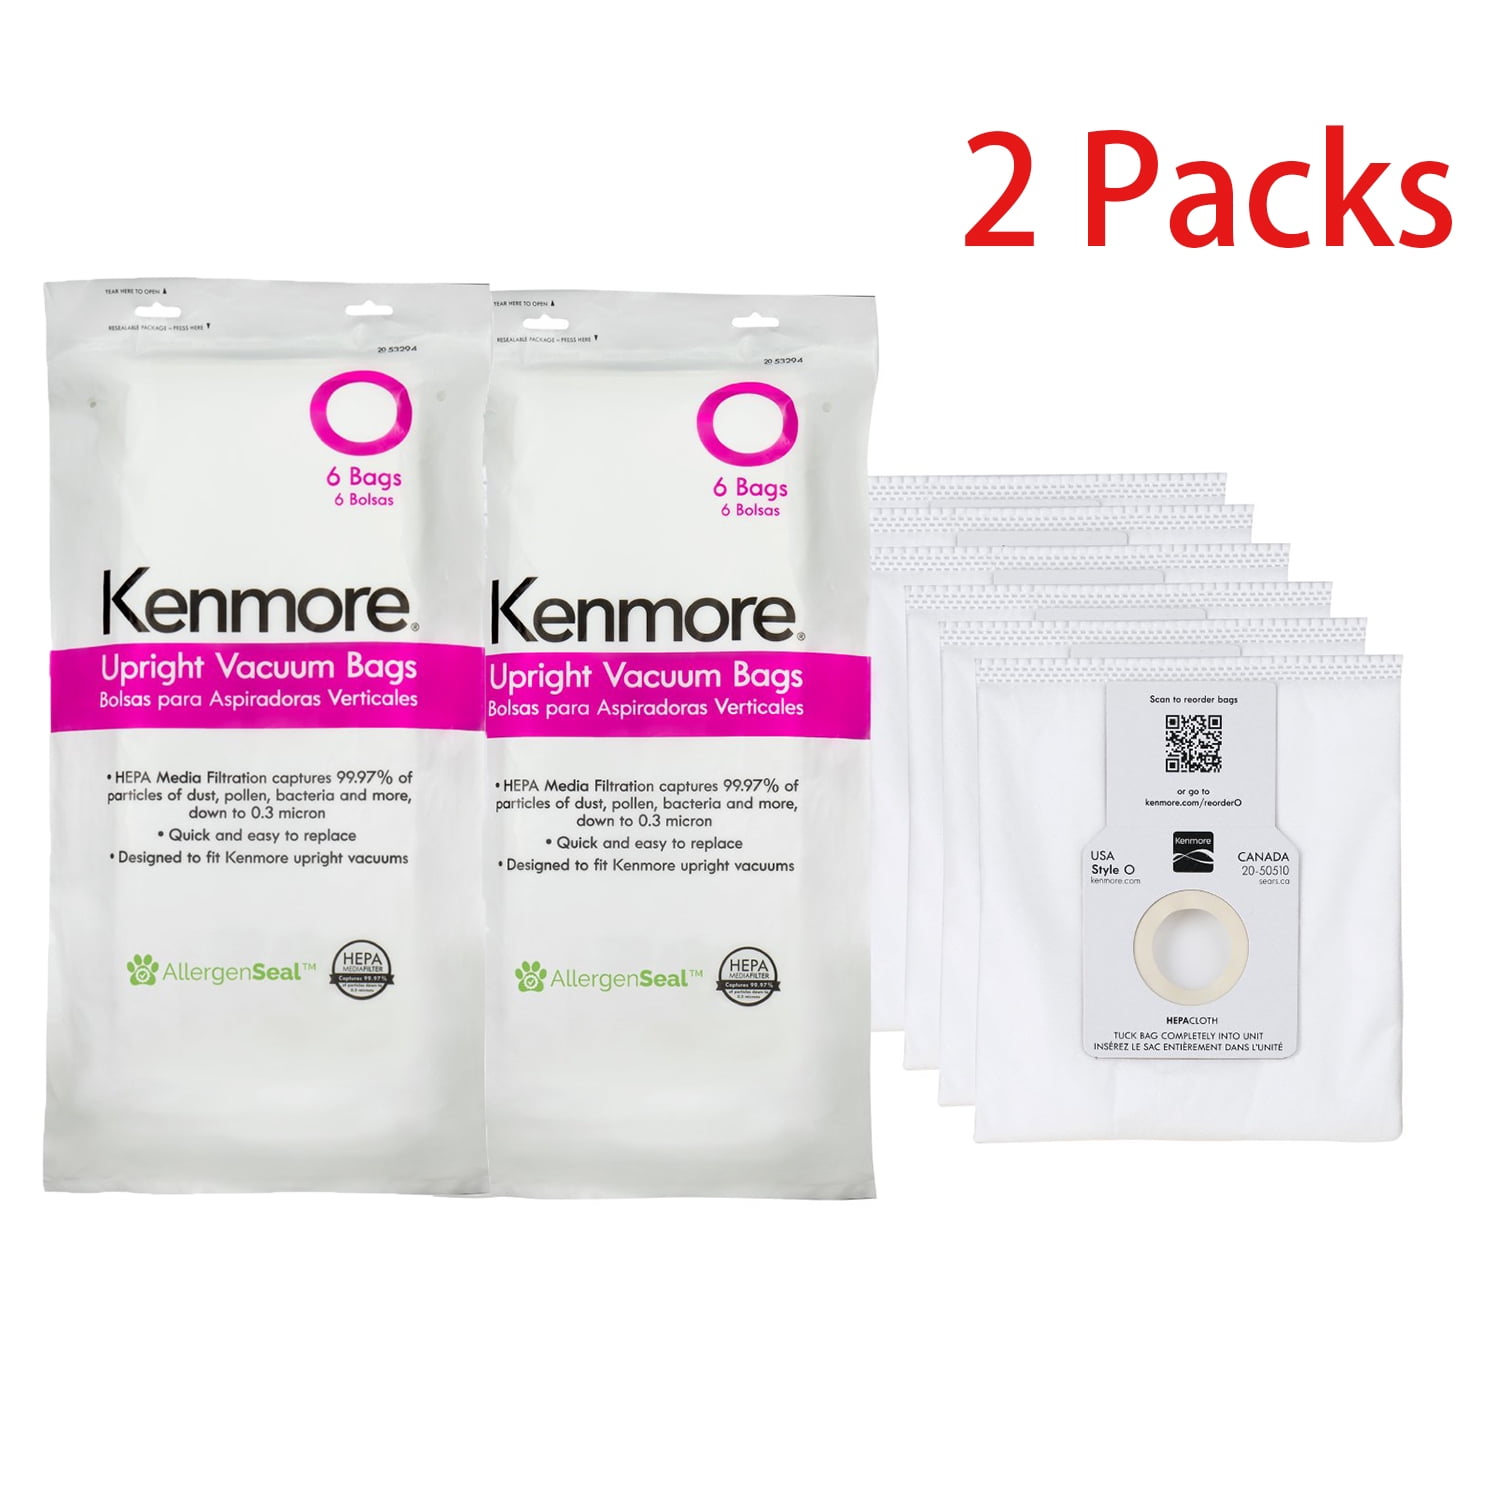 Details about   6Pack Q/C Vacuum Bags HEPA for Kenmore Type Upright Vacuums Style 53294 US Stock 